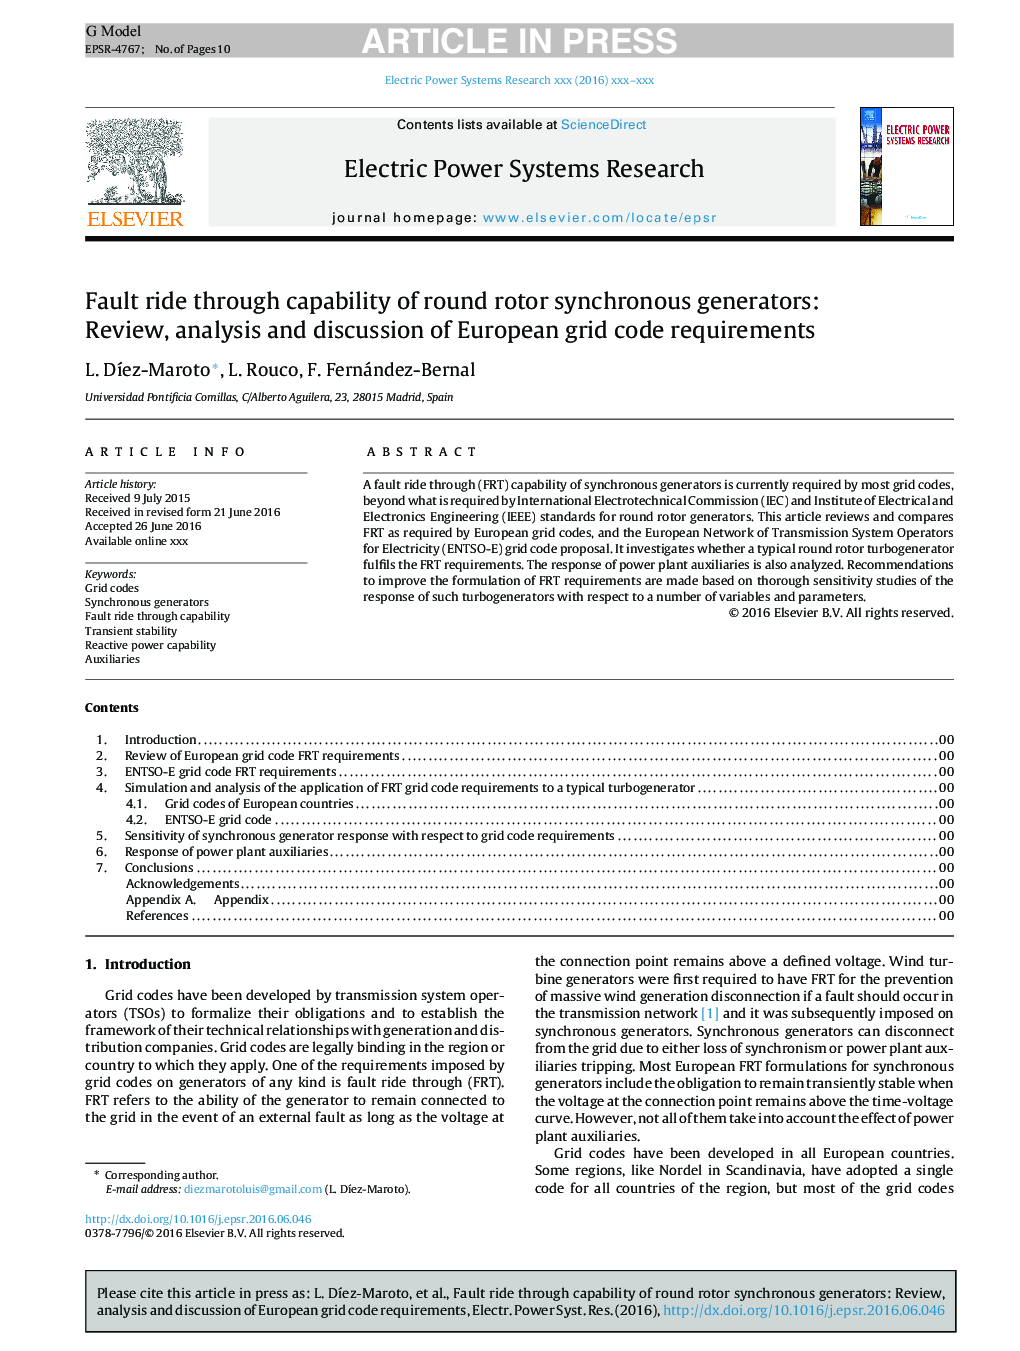 Fault ride through capability of round rotor synchronous generators: Review, analysis and discussion of European grid code requirements